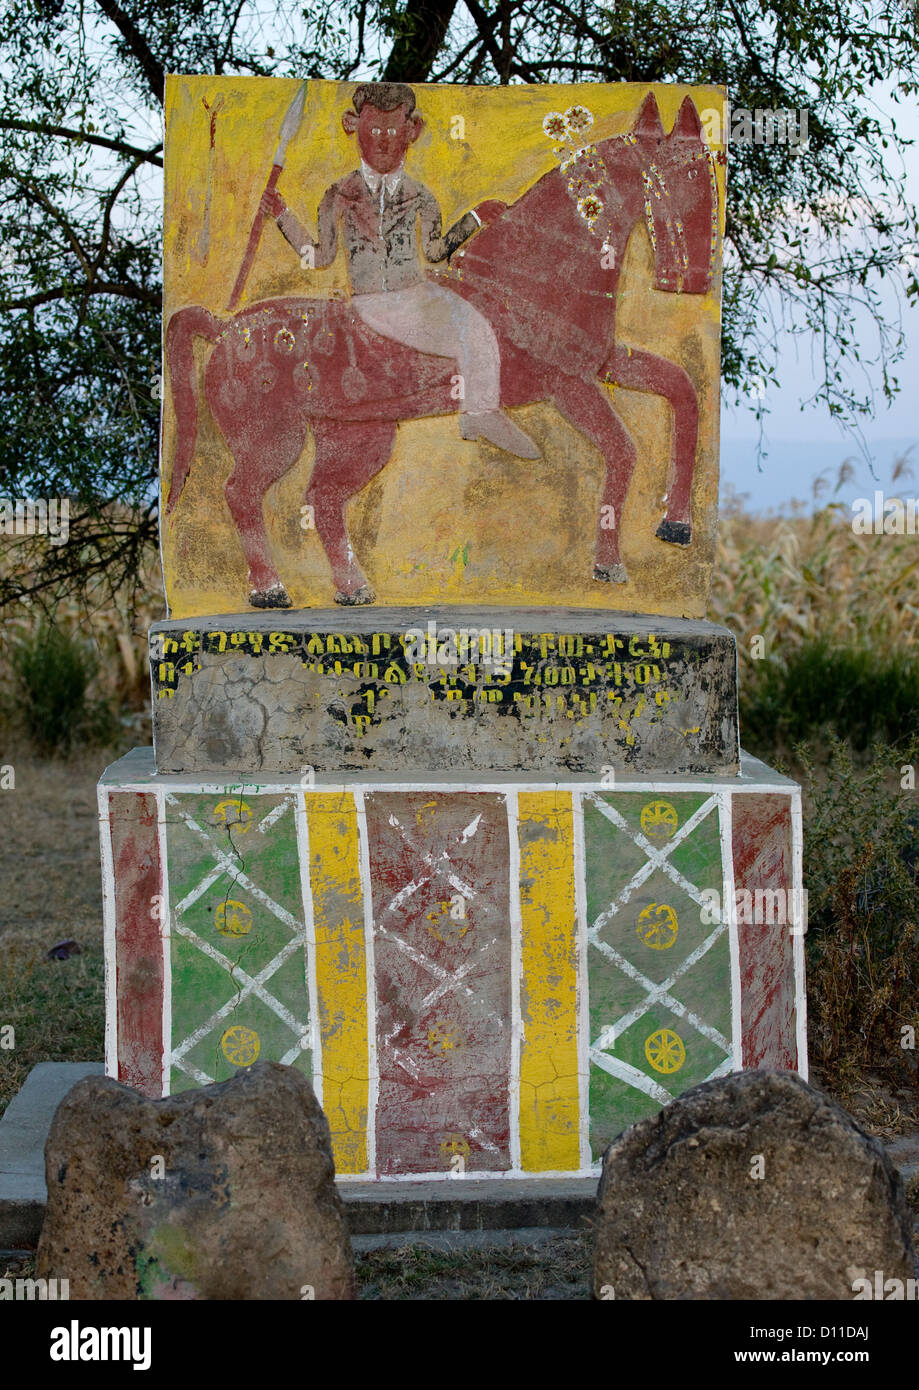 Grave Decorated With The Portrait Of The Dead Warrior Riding A Horse, Hosanna, Ethiopia Stock Photo